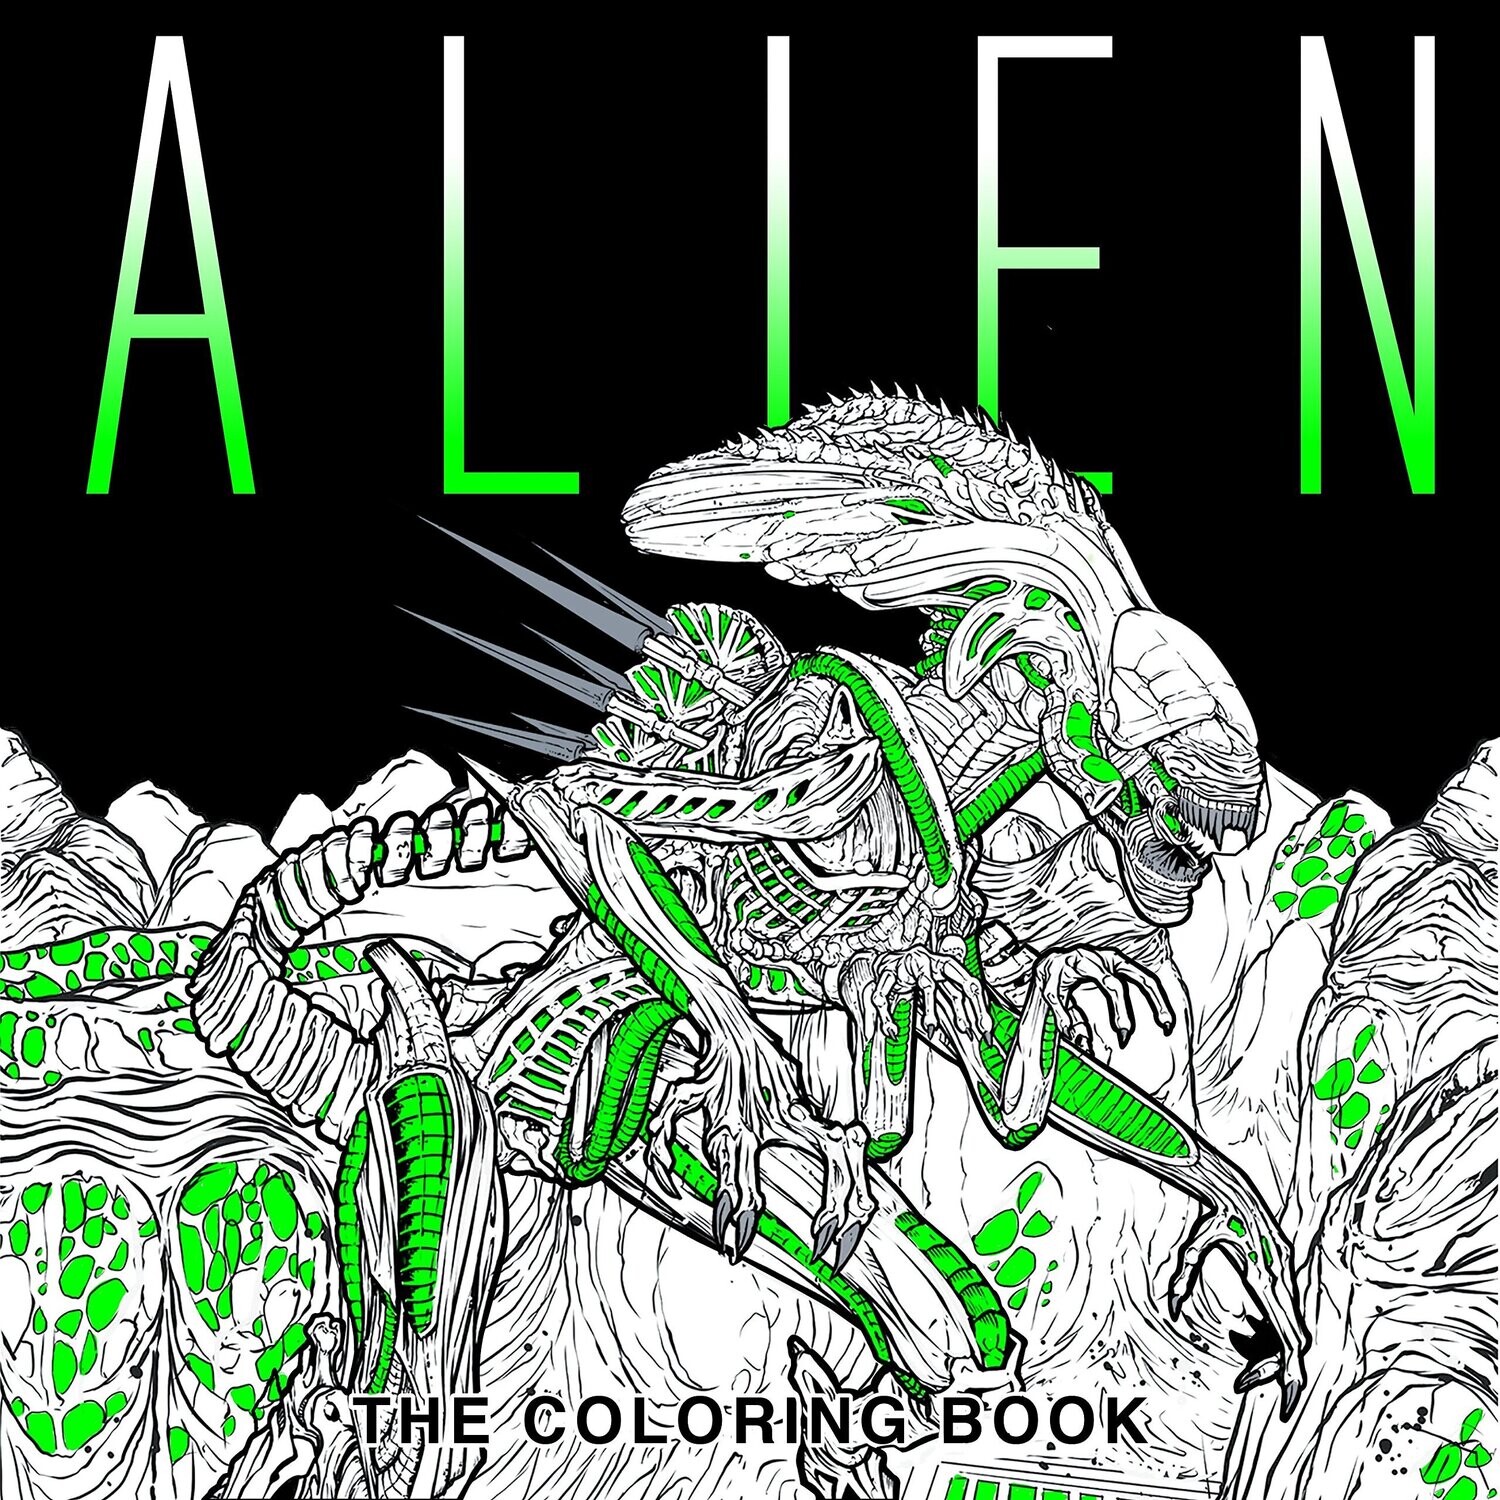 Alien: The Coloring Book (Paperback, NEW)